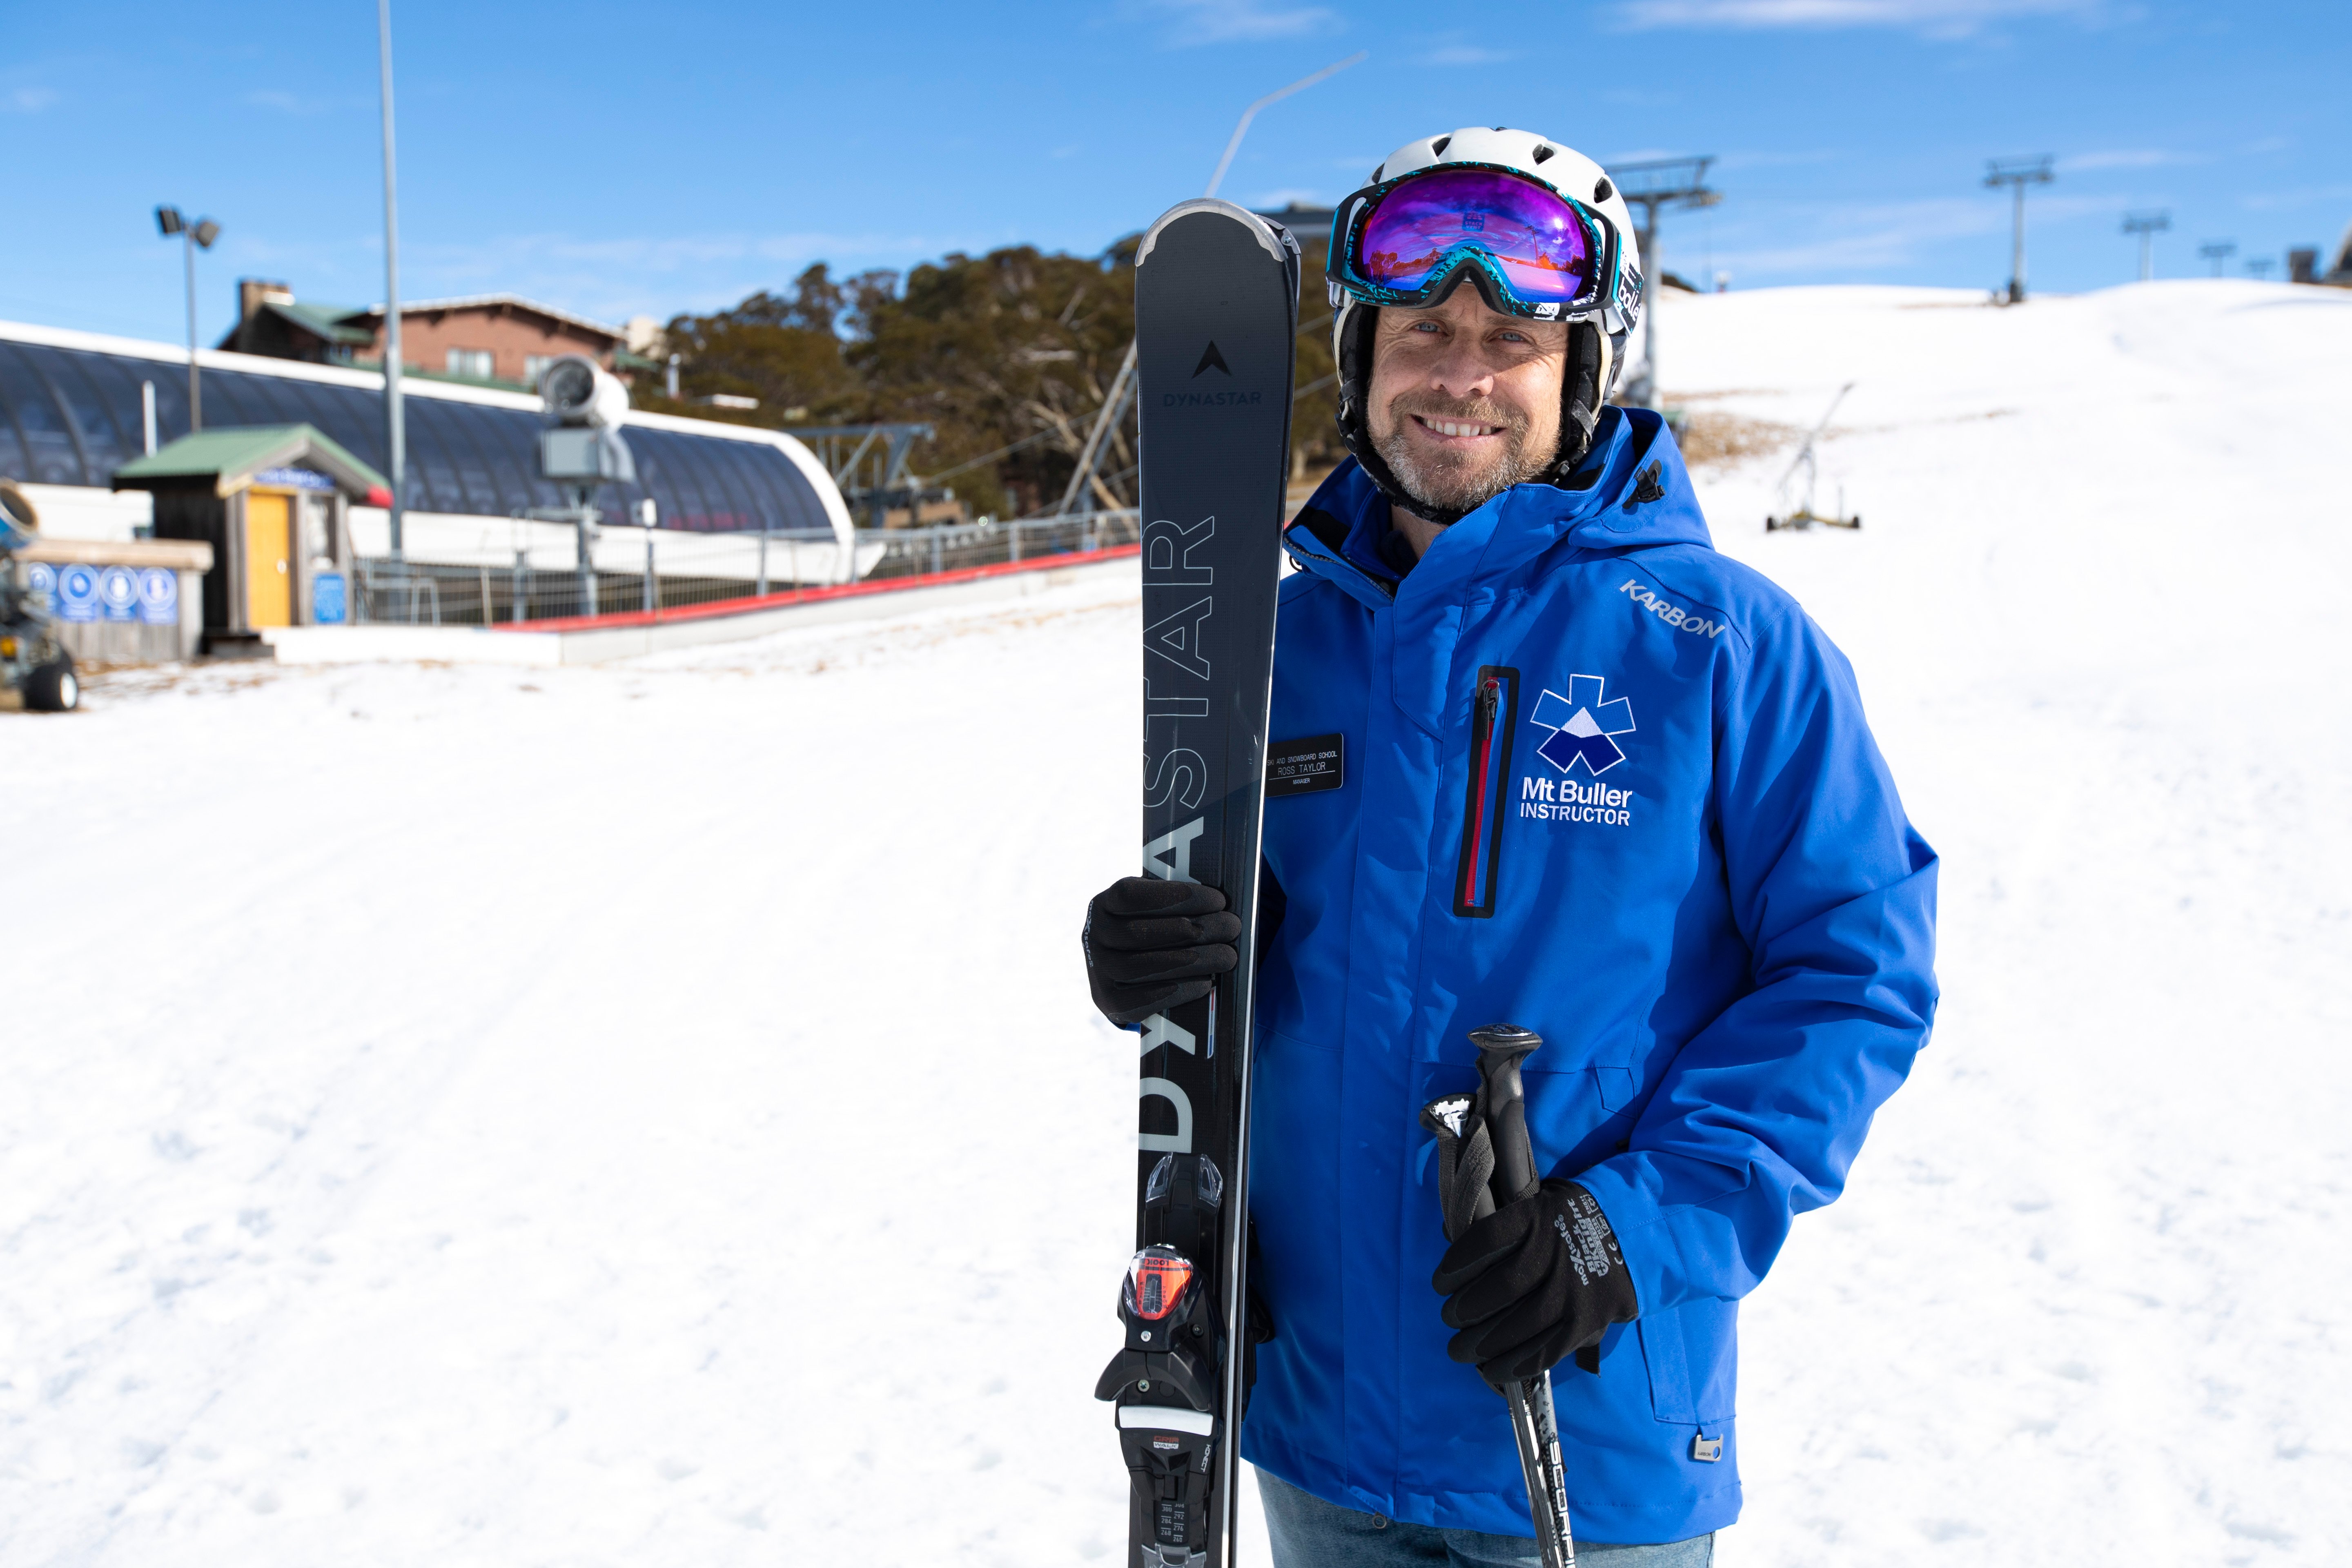 private ski instructor standing with skis